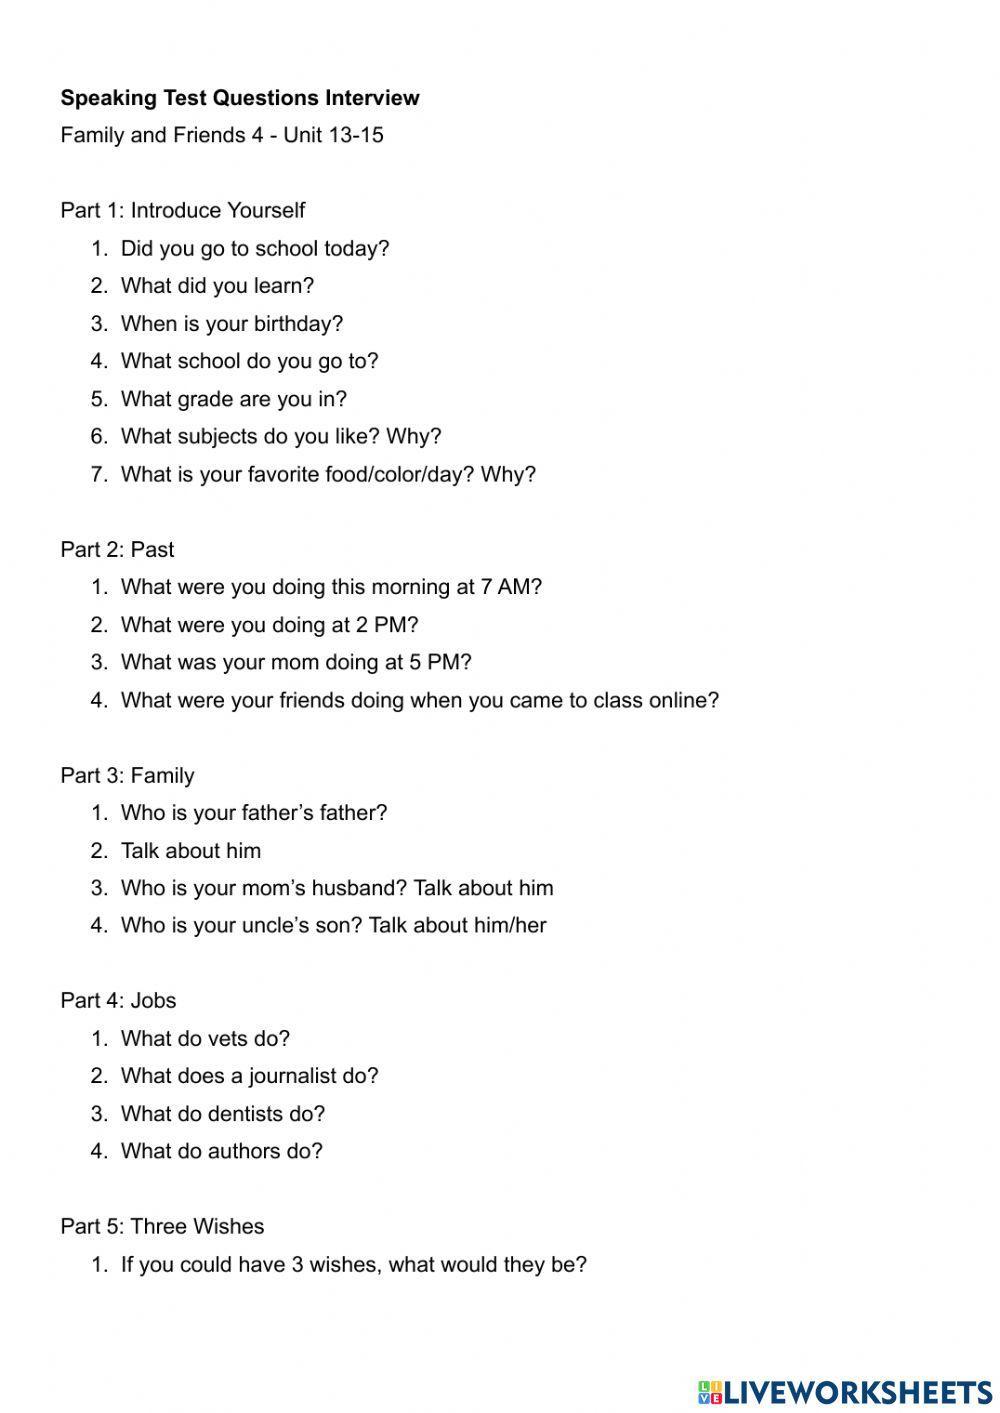 FF4 Speaking Test Questions Unit 13-15